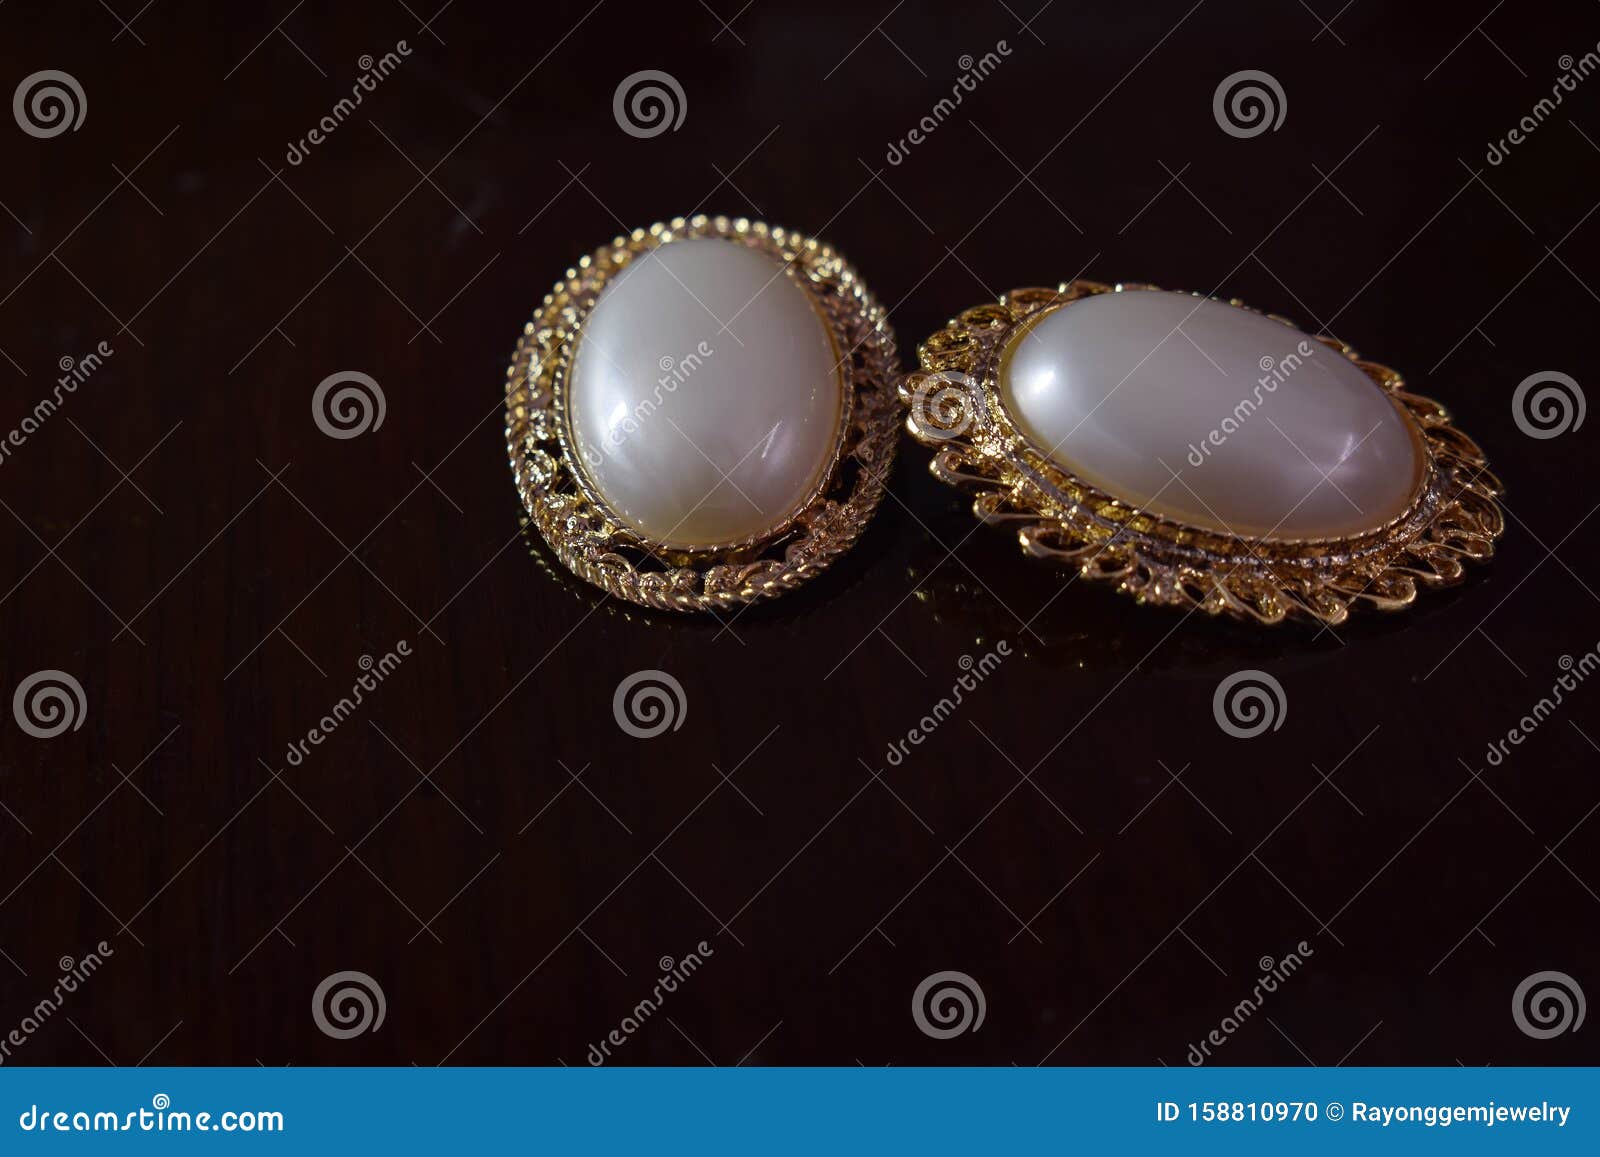 Mother of Pearl Texture with Real Pearls in a Sea Shell Stock